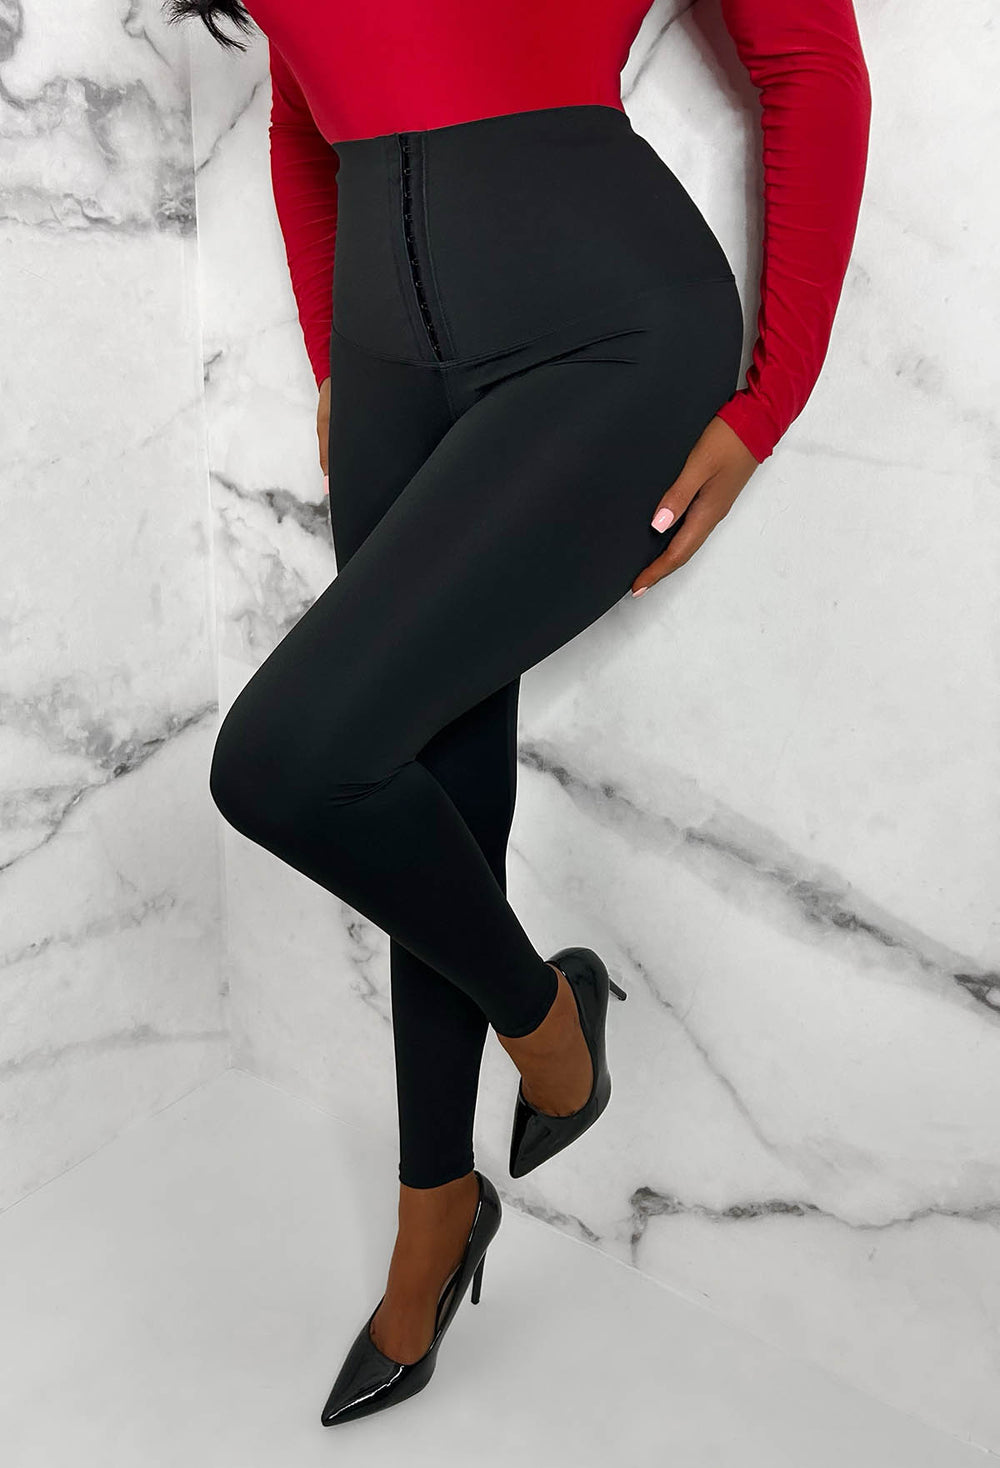 Cinched & Savvy Black Waist Cinched Corset Detail Leggings Limited Edition